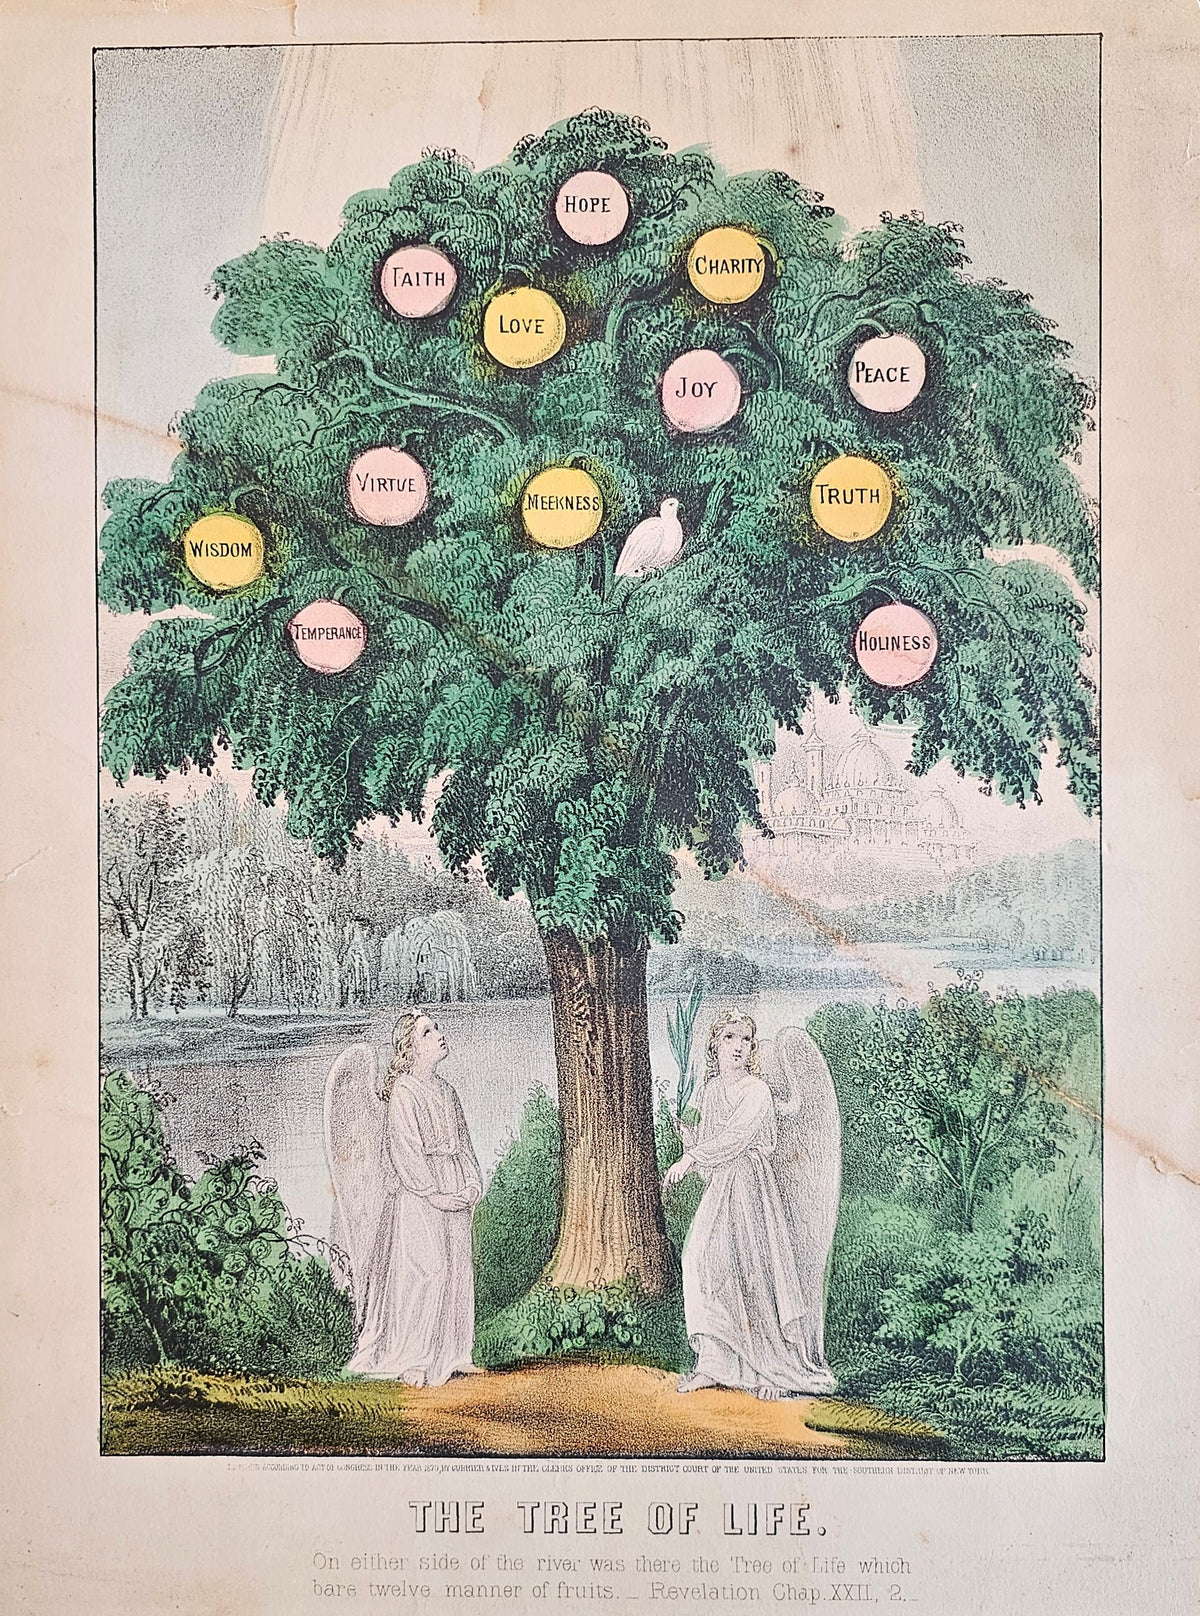 The Tree of Life- Hand Colored Engraving - Authentic Vintage Antique Print